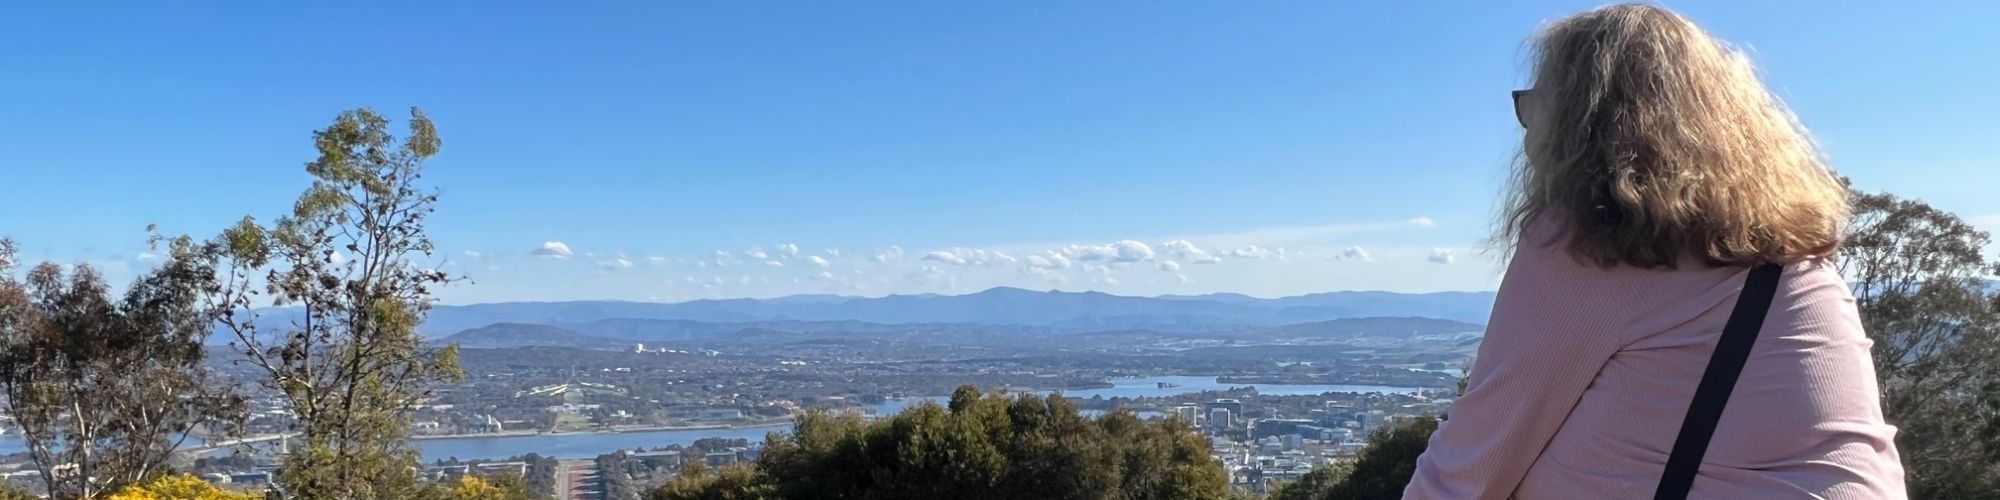 Sharyn at Mount Ainslie overlooking Canberra while travel, live and work abroad the world.